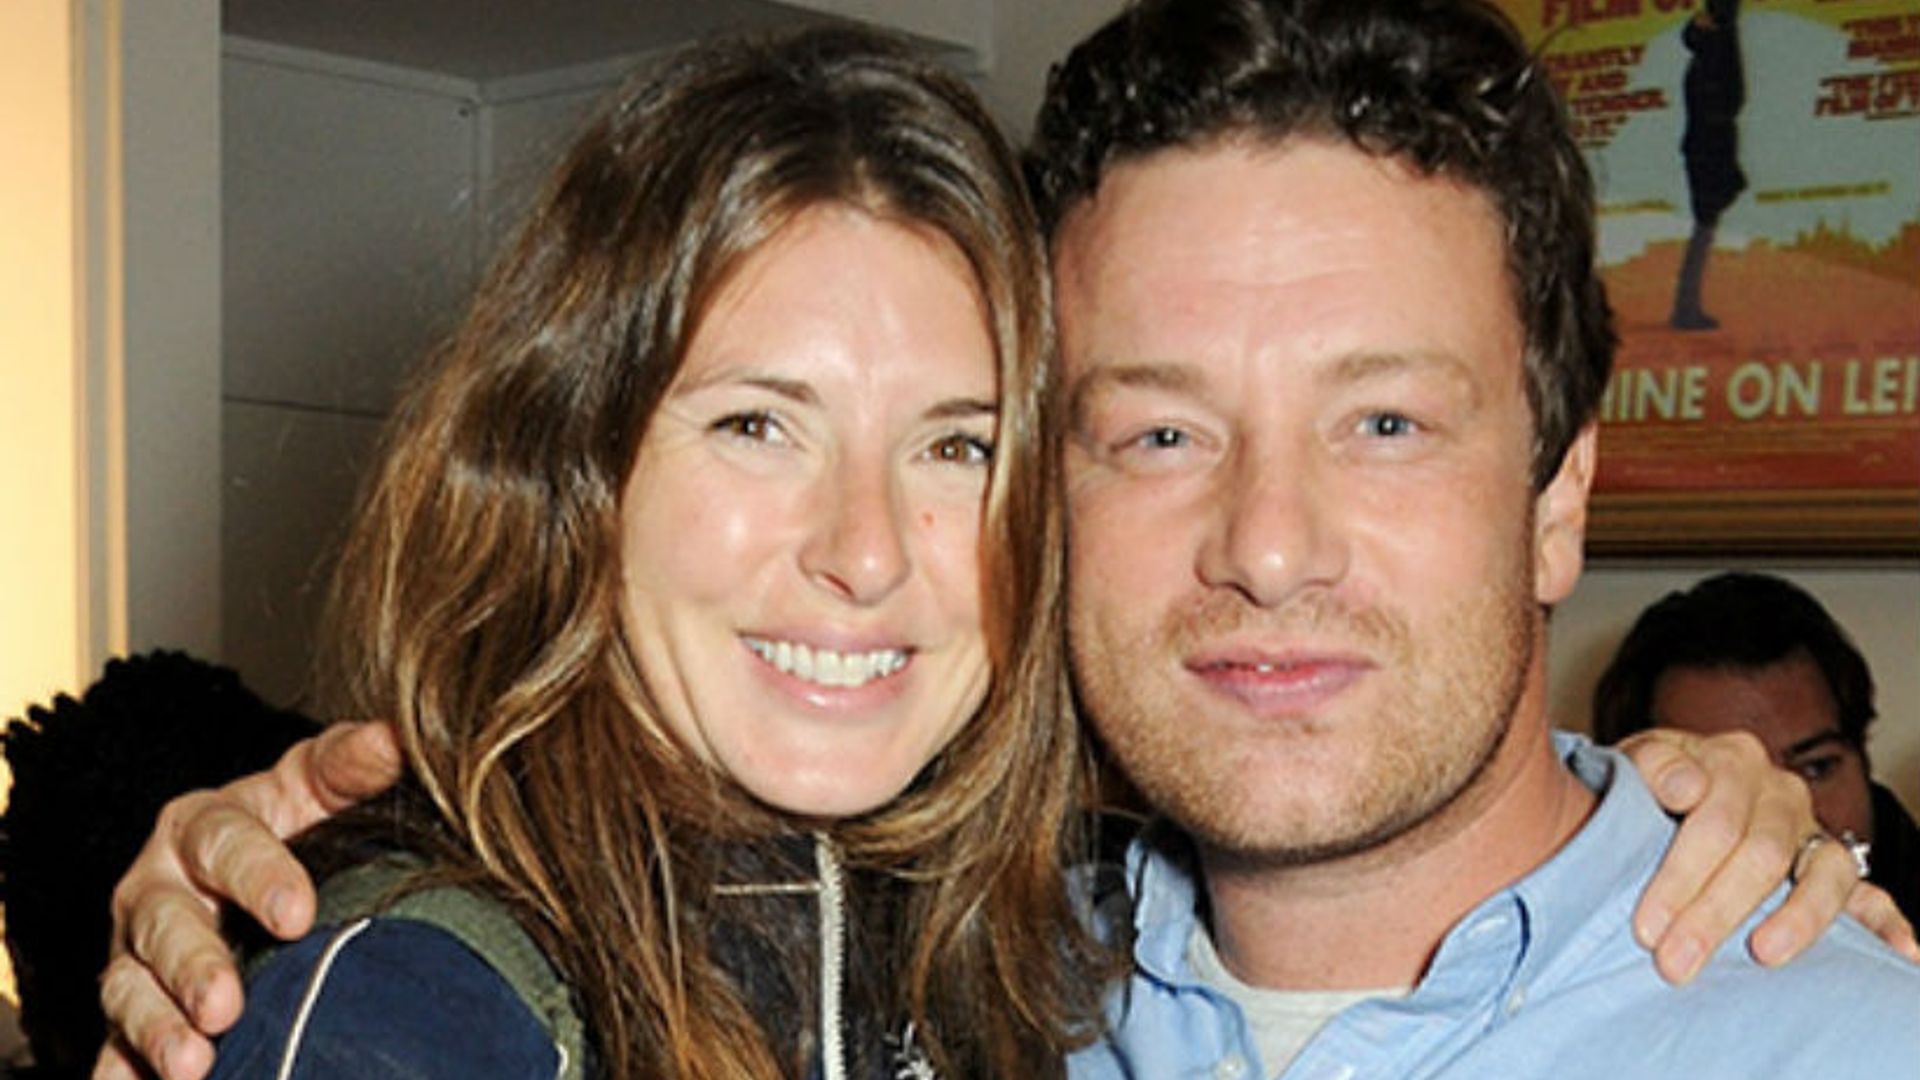 Jools Oliver’s photo of sons Buddy and baby River bonding is the sweetest - take a look